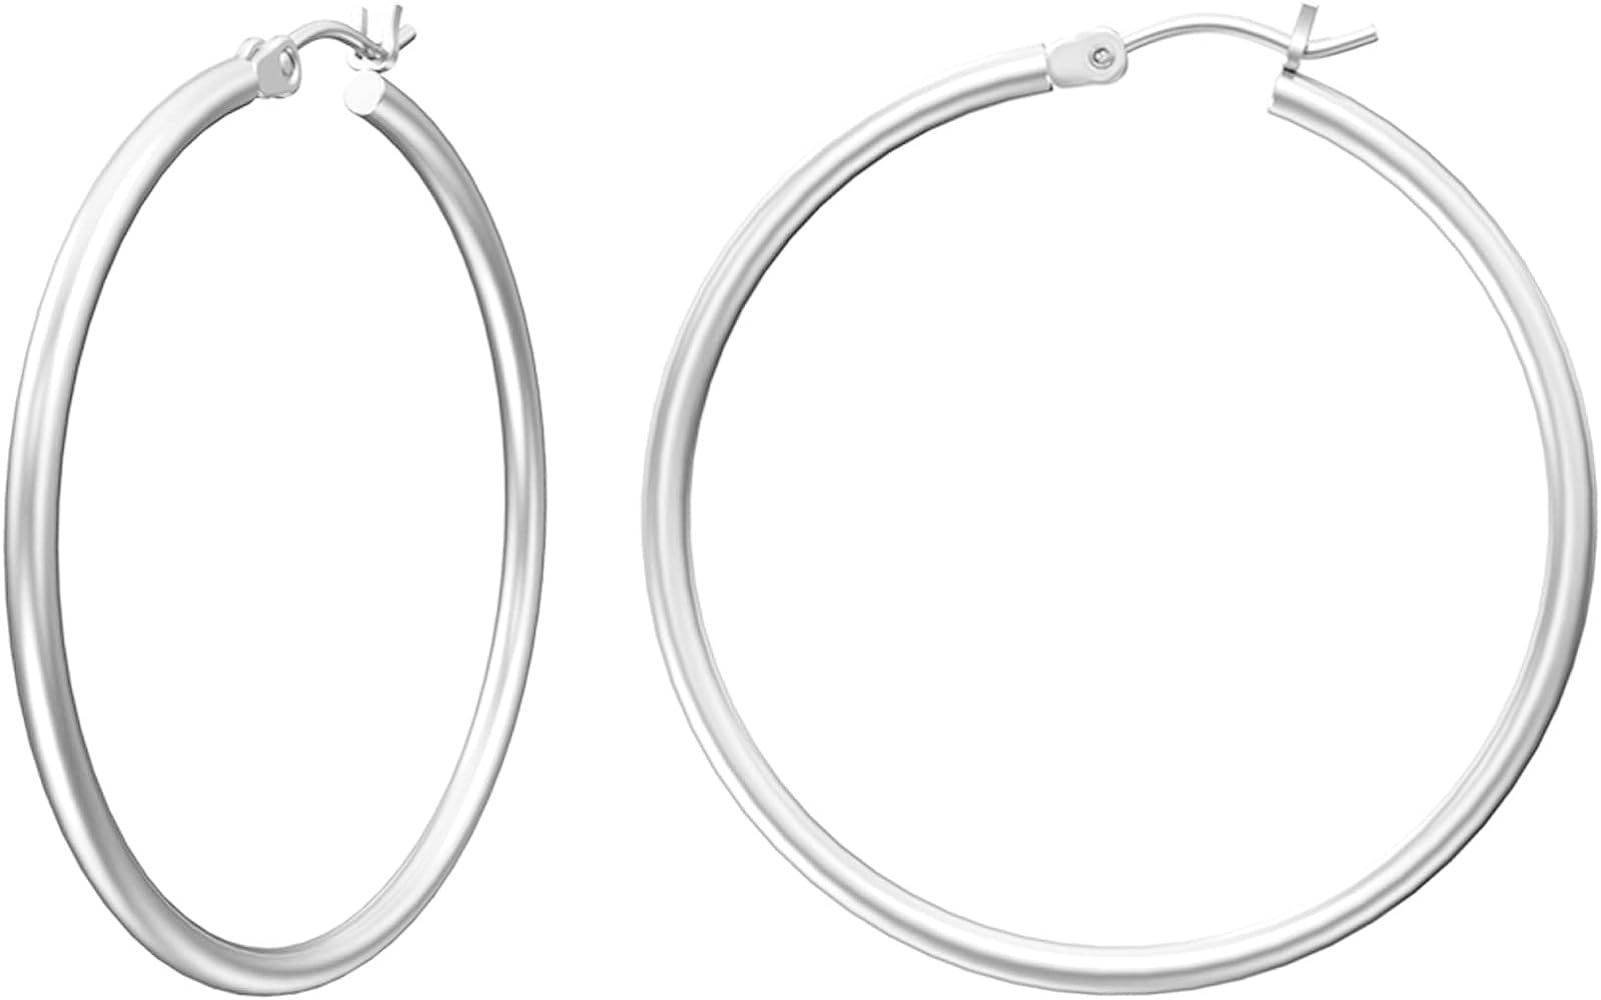 Gacimy Gold Hoop Earrings for Women, 14K Gold Plated Hoops with 925 Sterling Silver Post | Amazon (US)